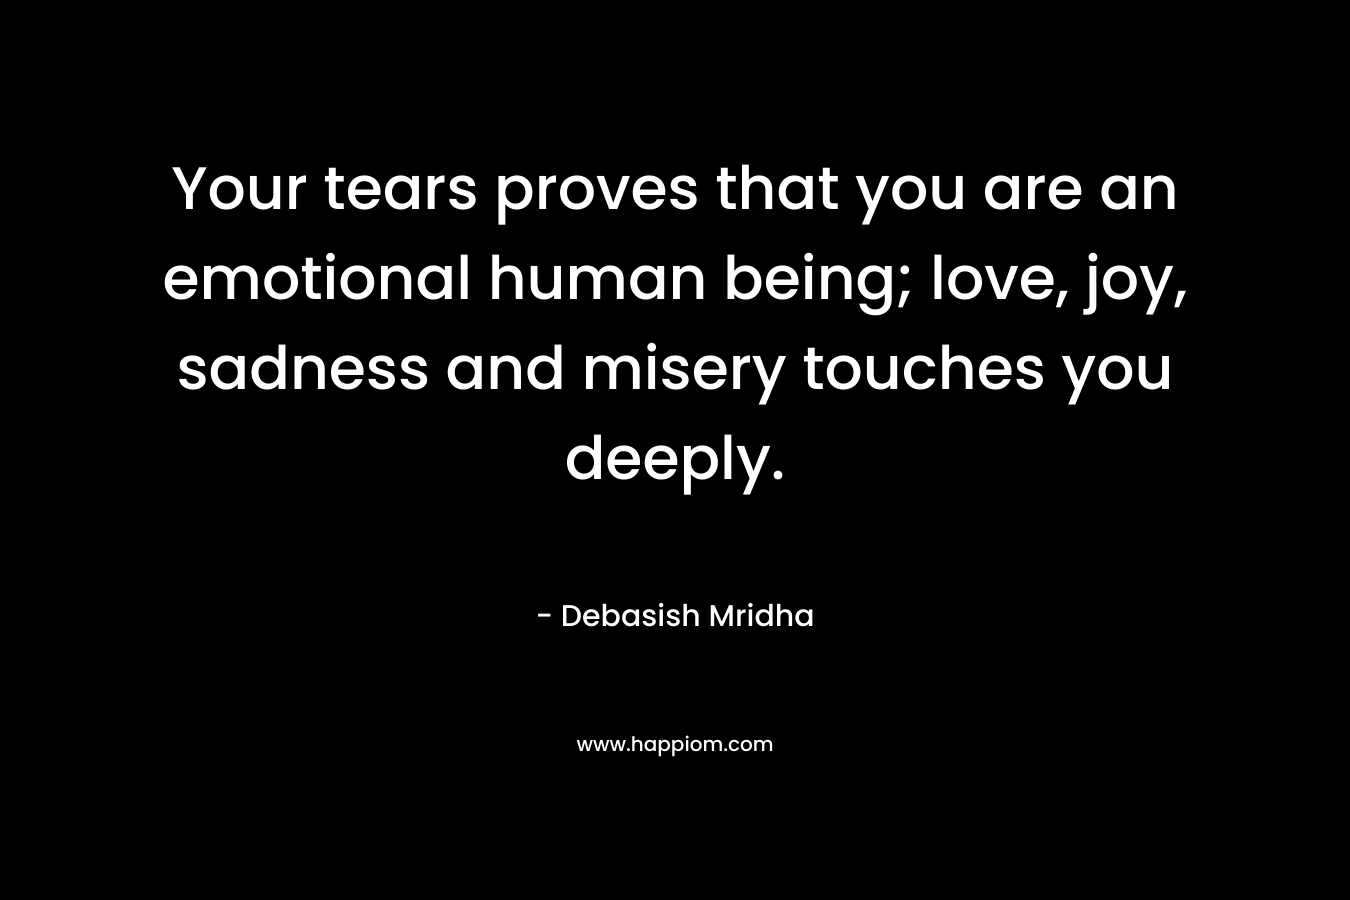 Your tears proves that you are an emotional human being; love, joy, sadness and misery touches you deeply.